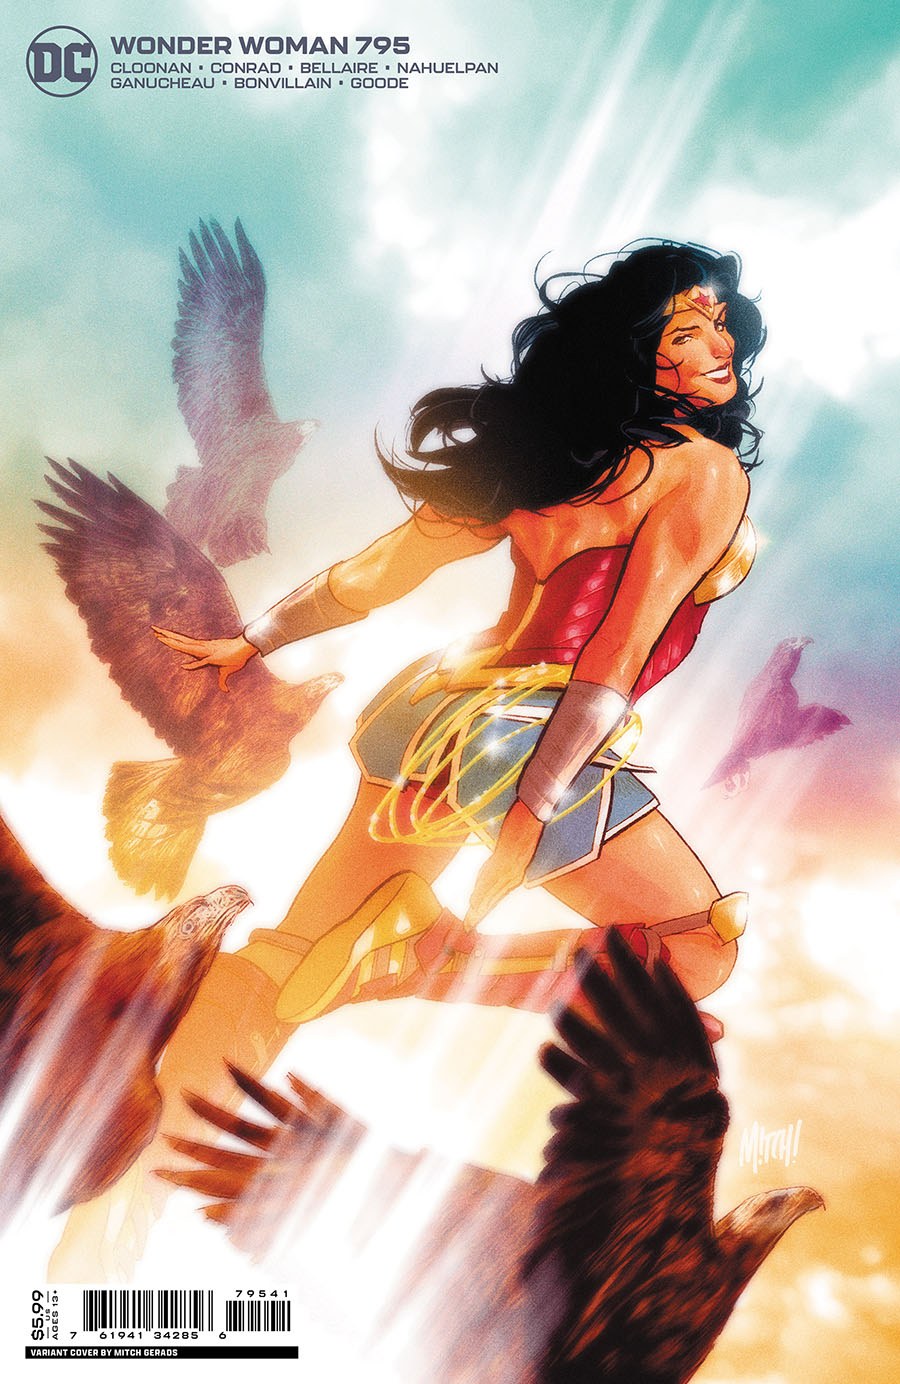 Wonder Woman Vol 5 #795 Cover C Variant Mitch Gerads Card Stock Cover (Limit 1 Per Customer)